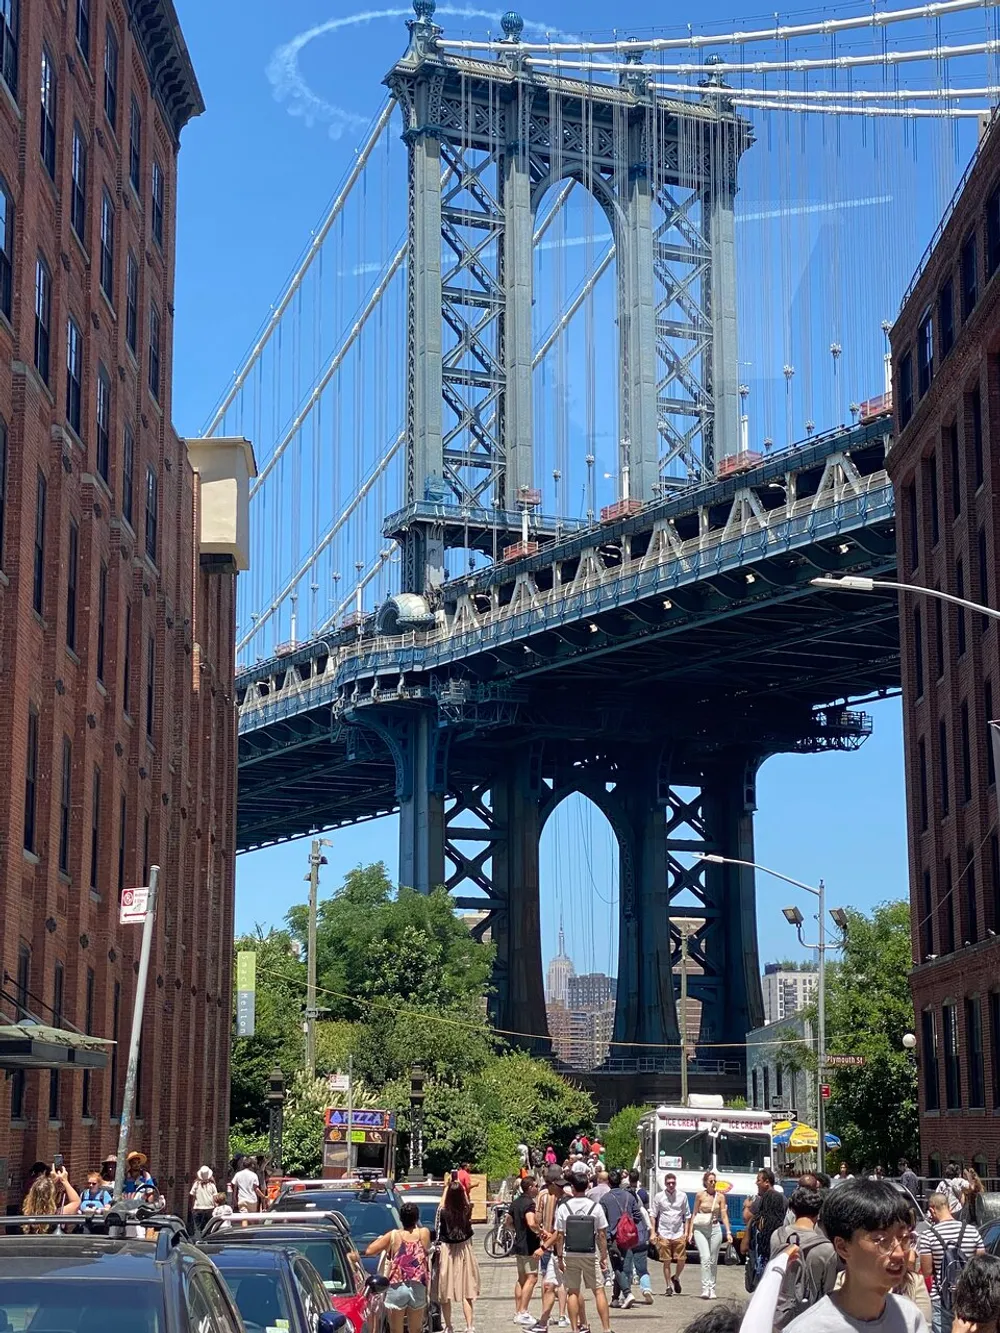 This image features pedestrians and vehicles on a bustling street framed by old brick buildings with the iconic steel structure of the Manhattan Bridge towering in the background under a clear blue sky